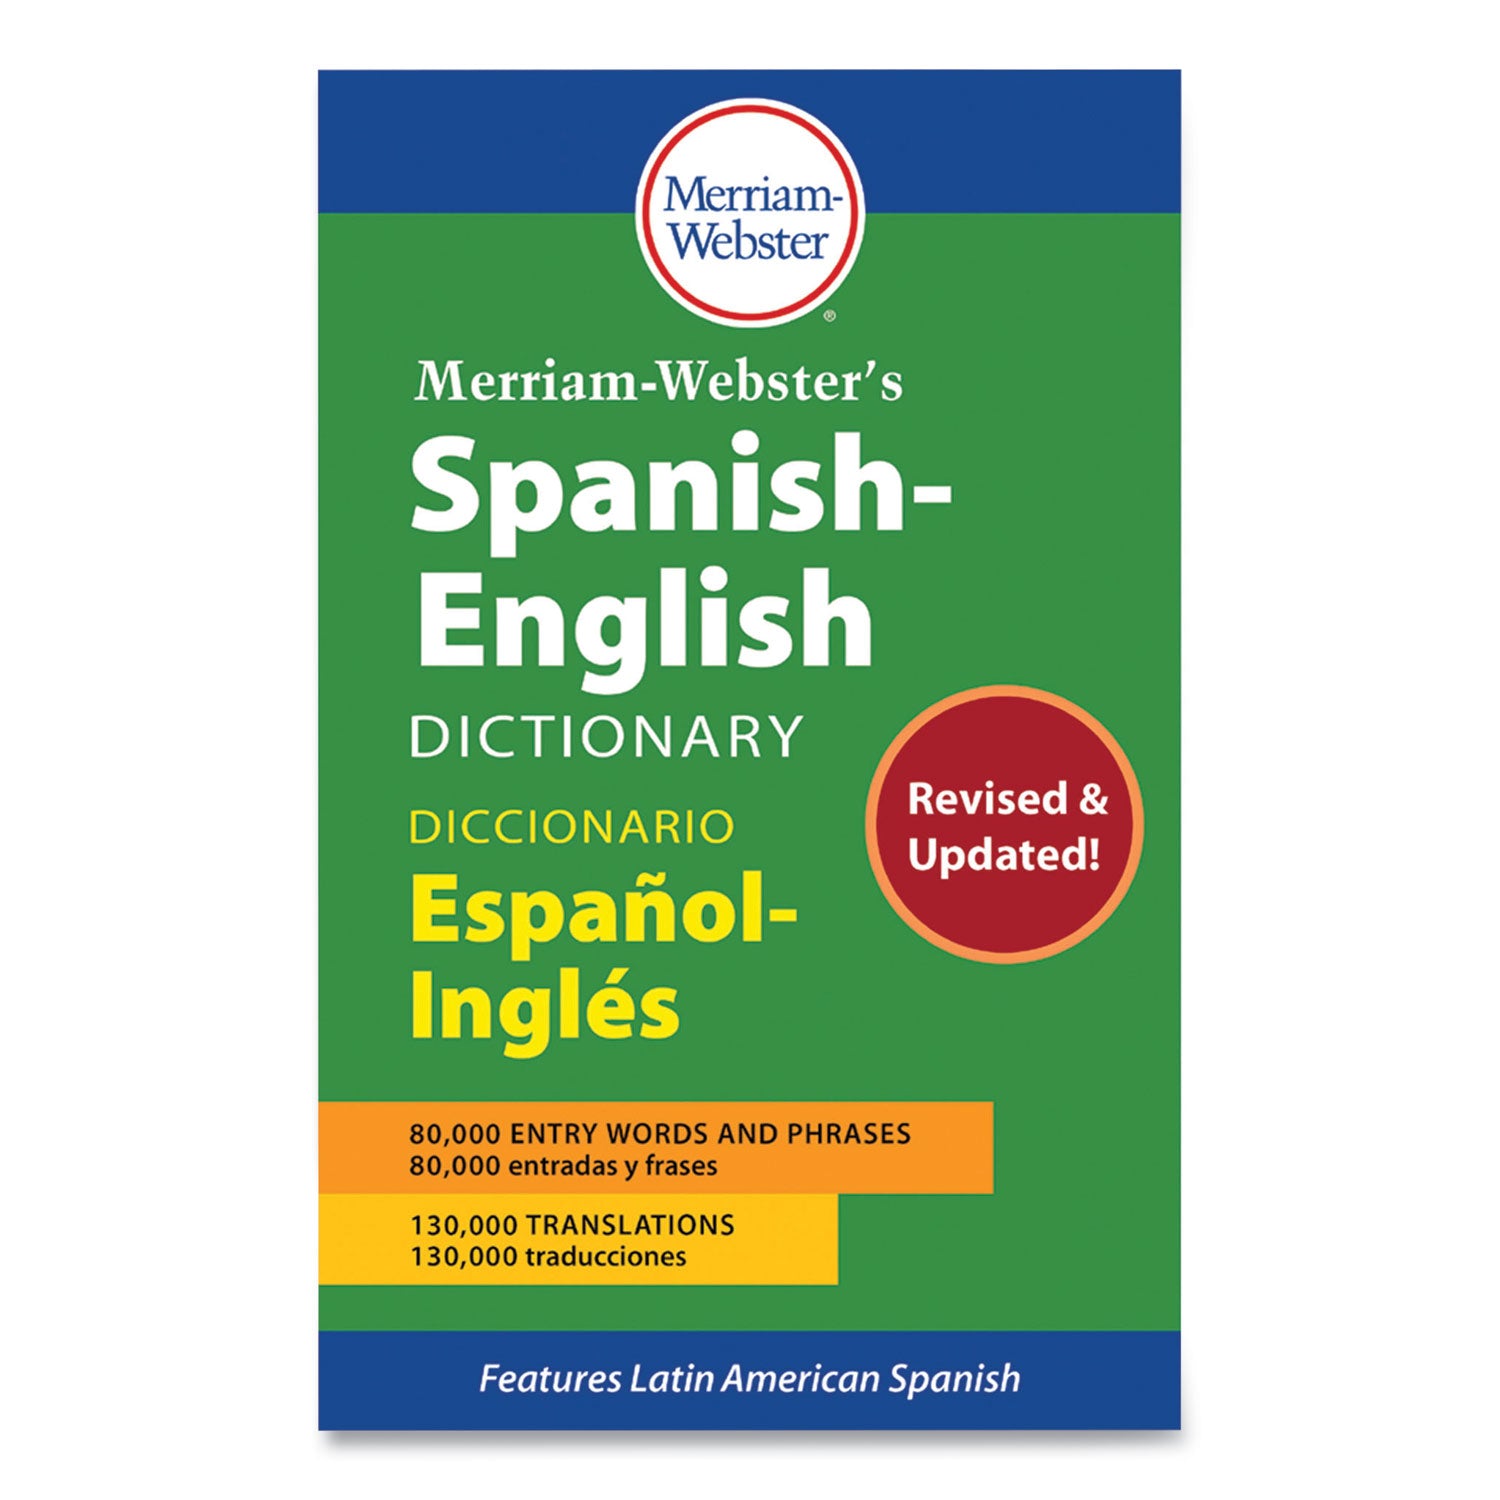 spanish-english-dictionary-paperback-928-pages_mer2987 - 1